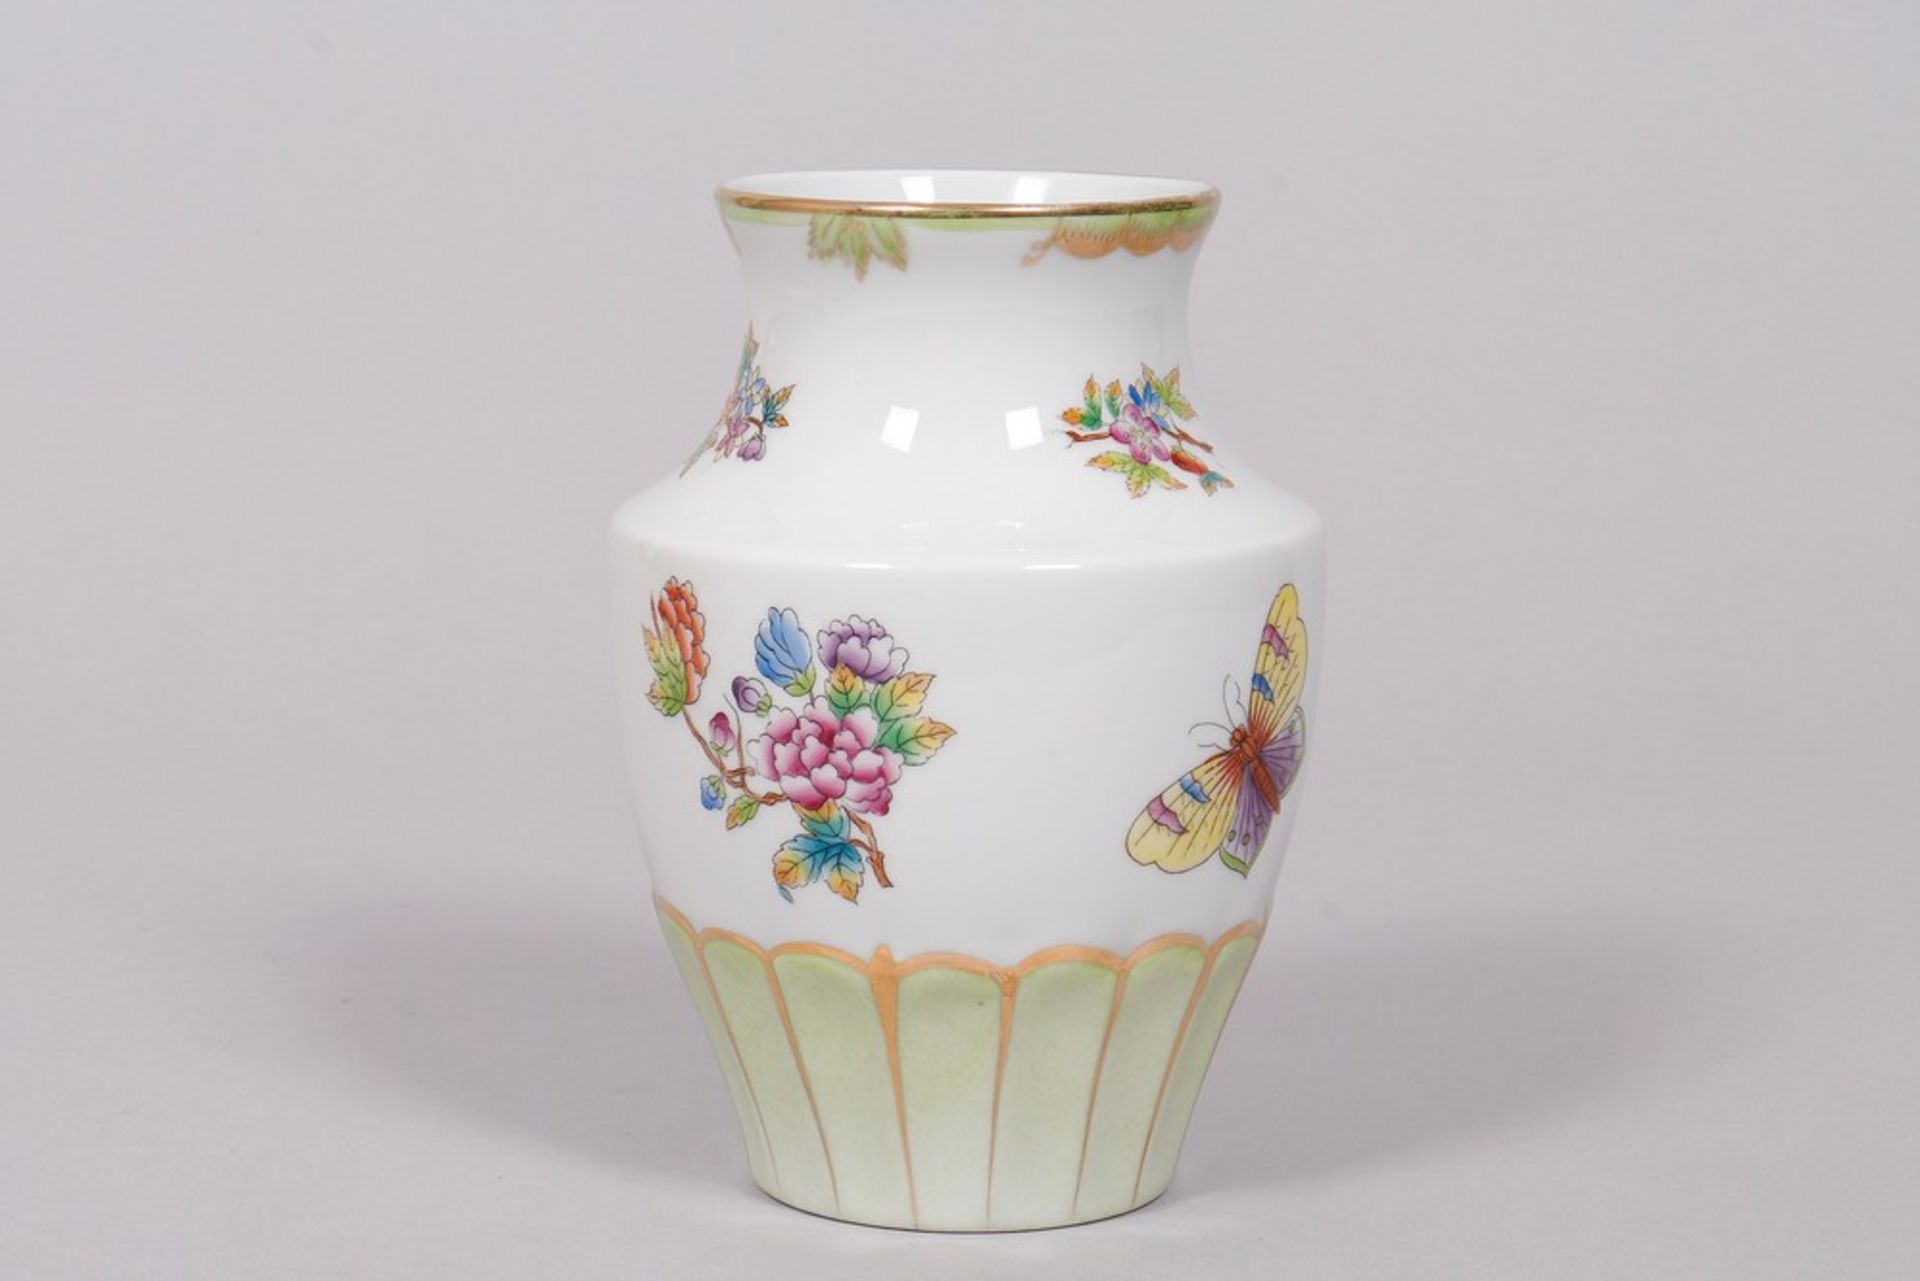 Vase, Herend, Hungary, "Victoria" decor with light green base, 20th C. - Image 3 of 5